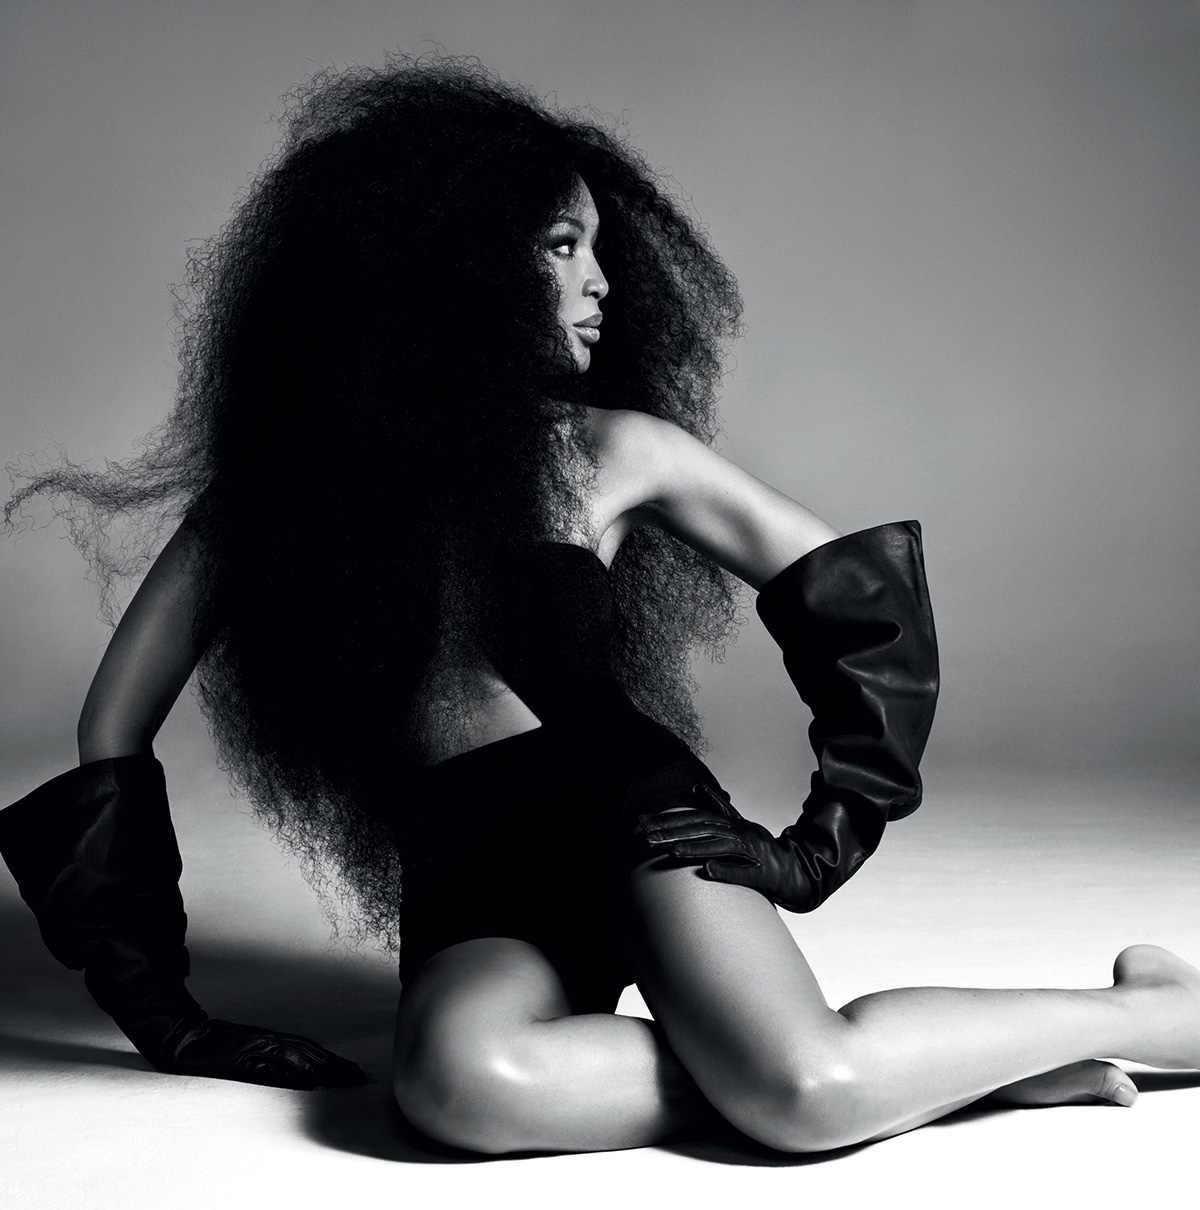 Naomi Campbell covers British Vogue March 2022 by Steven Meisel